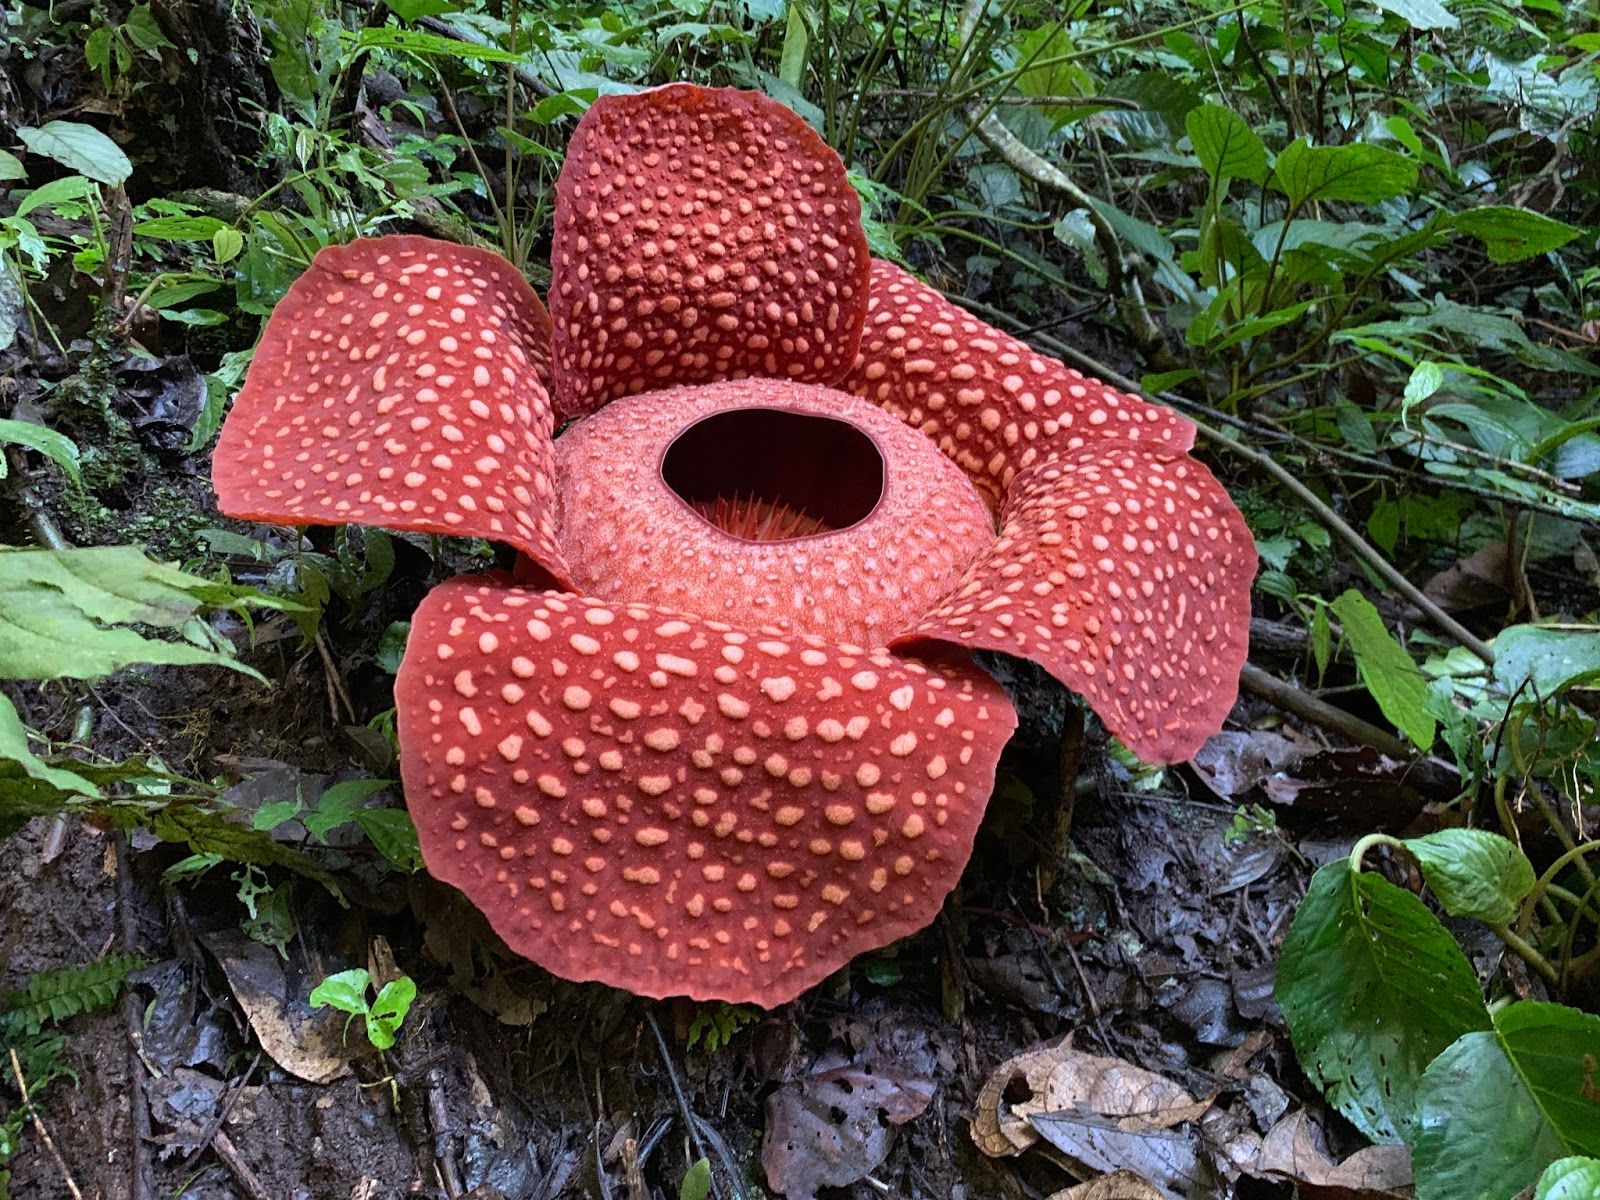 A garden's chronicle: Meeting with Rafflesia arnoldii, the world largest flower